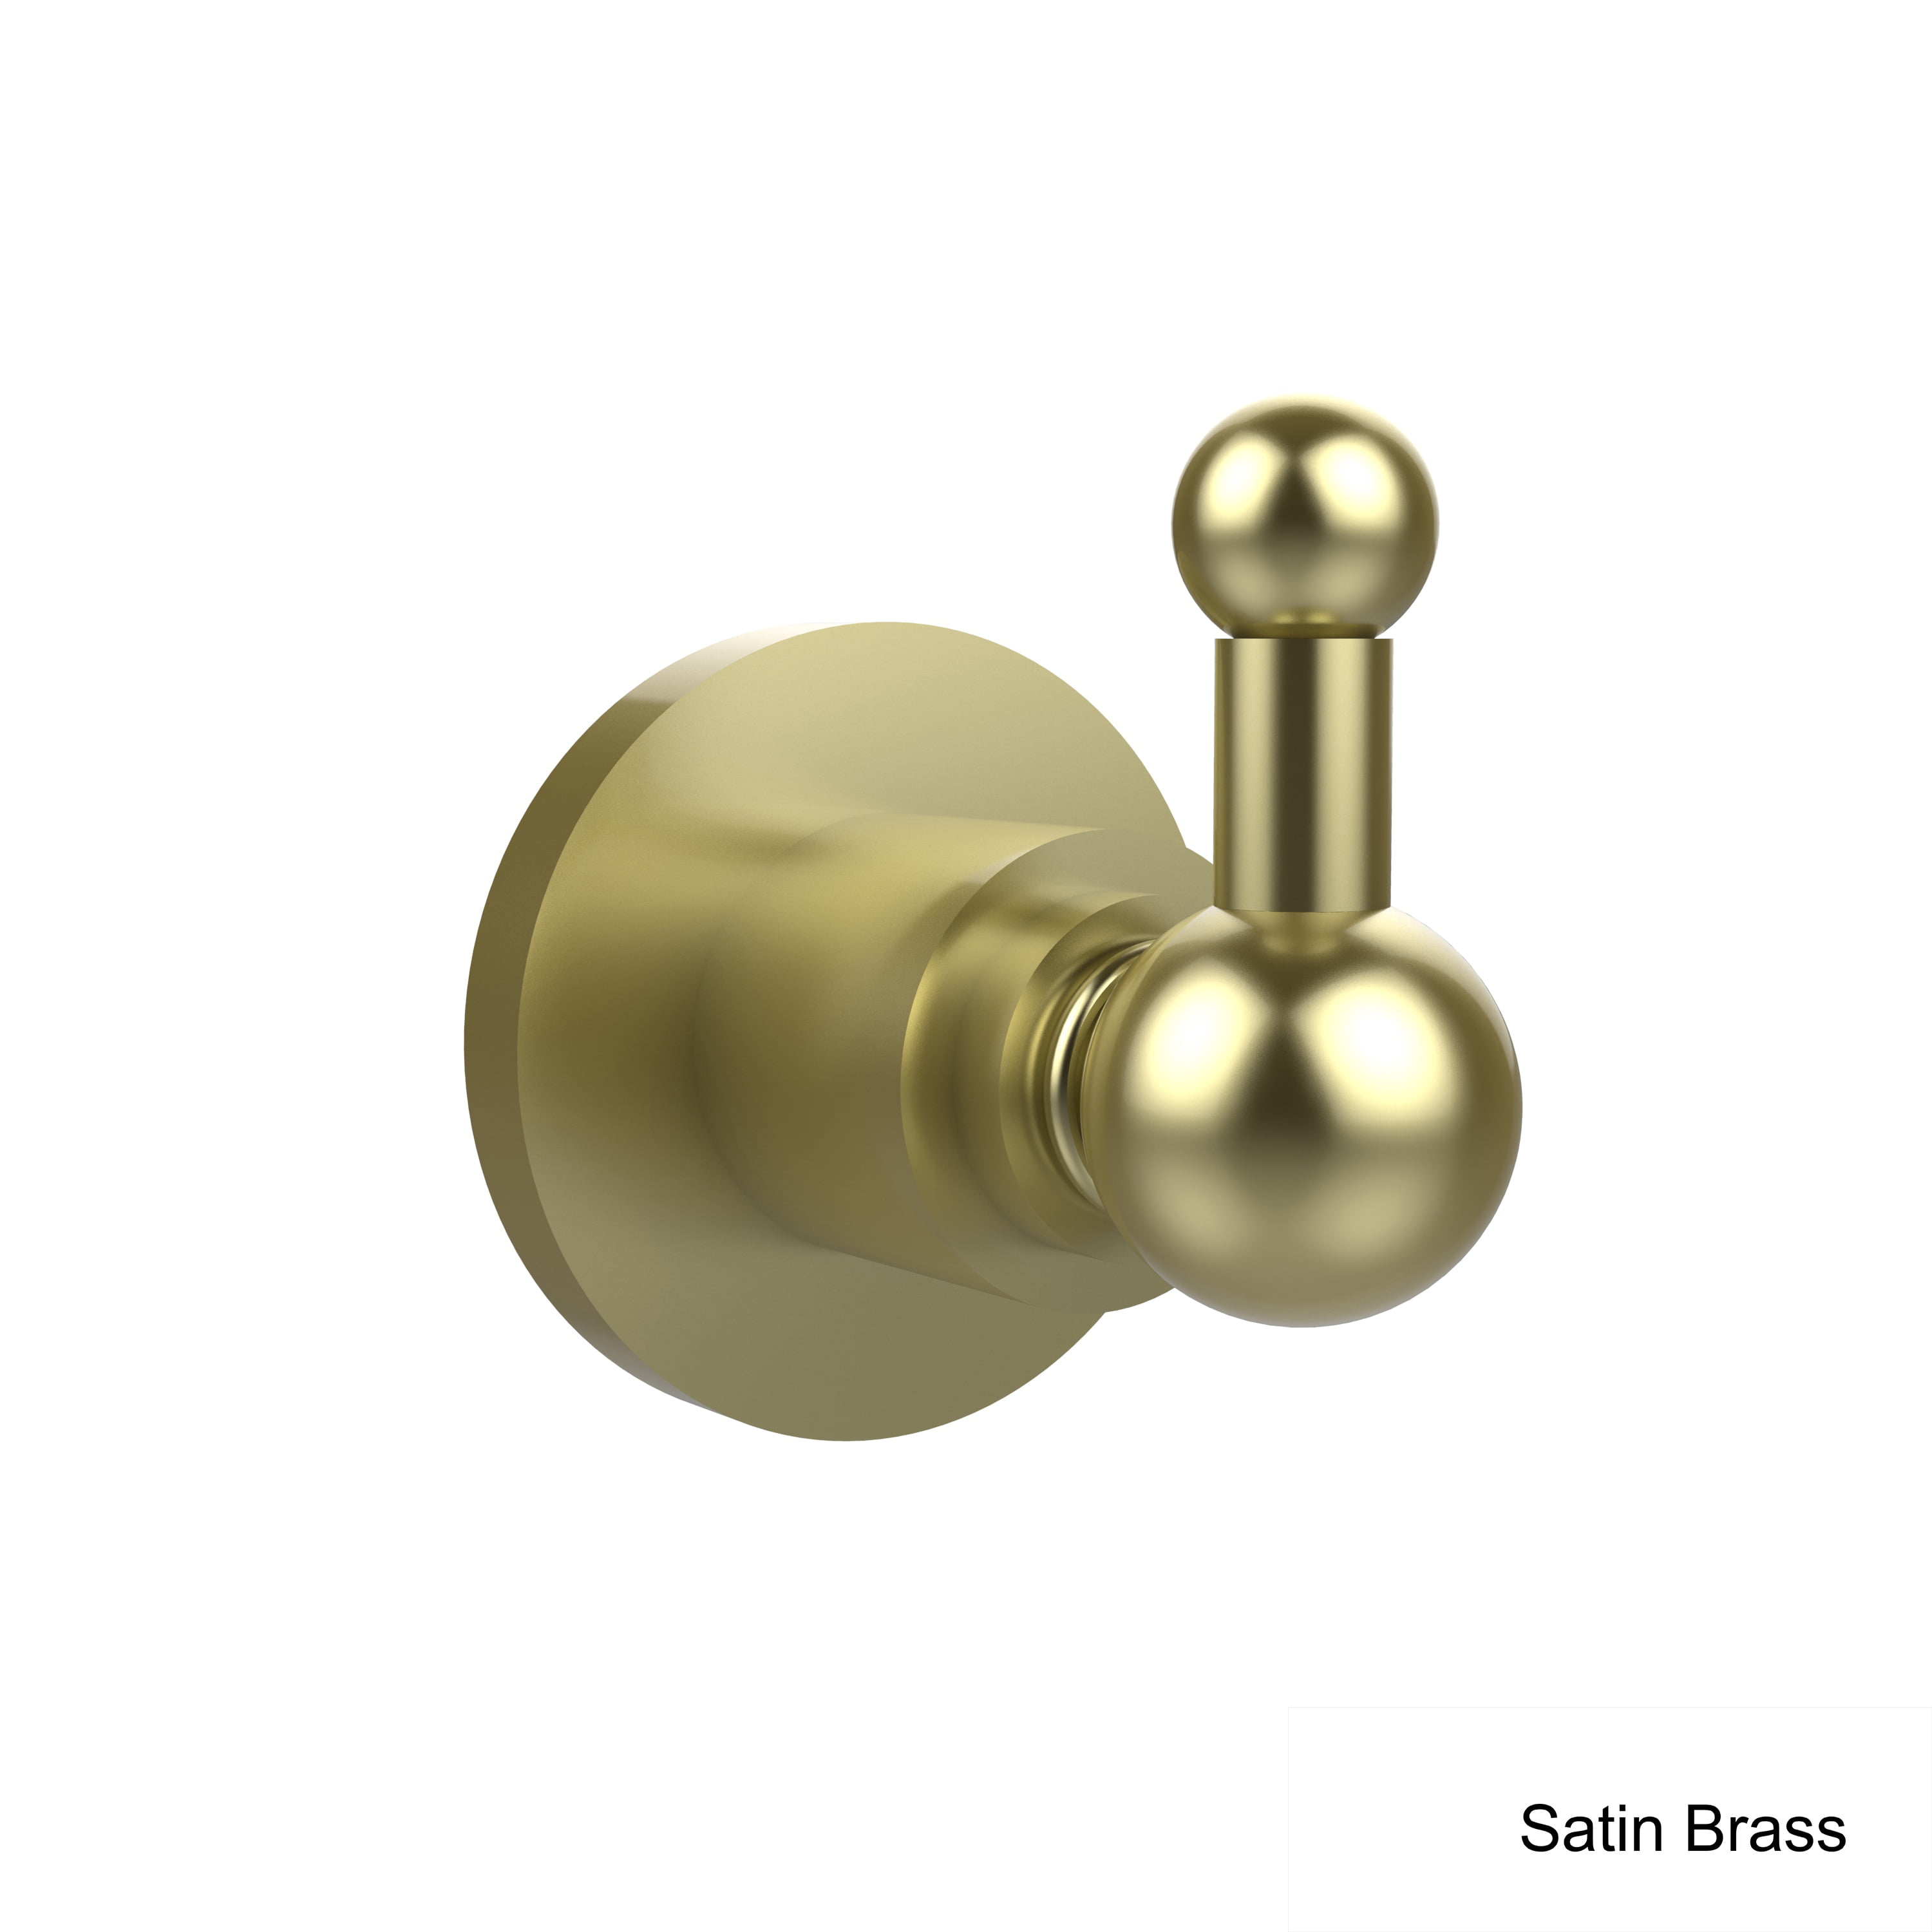 Allied Brass - Astor Place Collection Robe Hook in Polished Brass